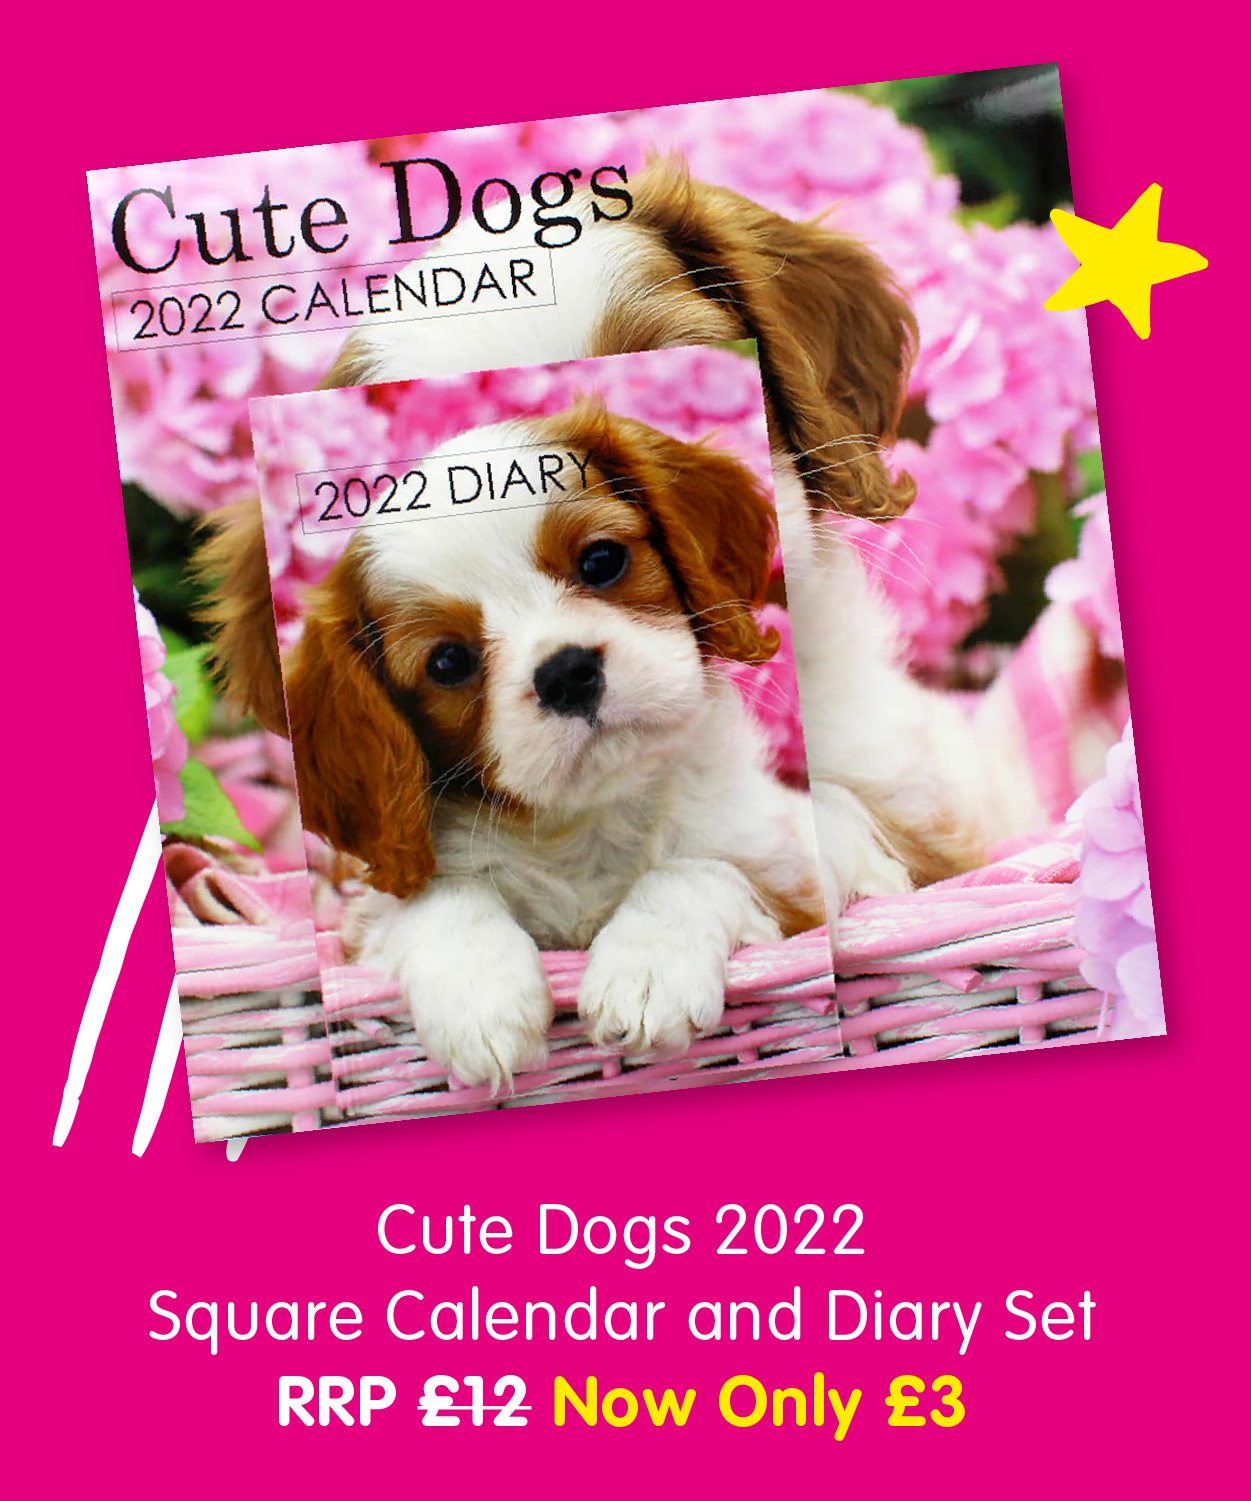 Cute Dogs 2022 Square Calendar and Diary Set